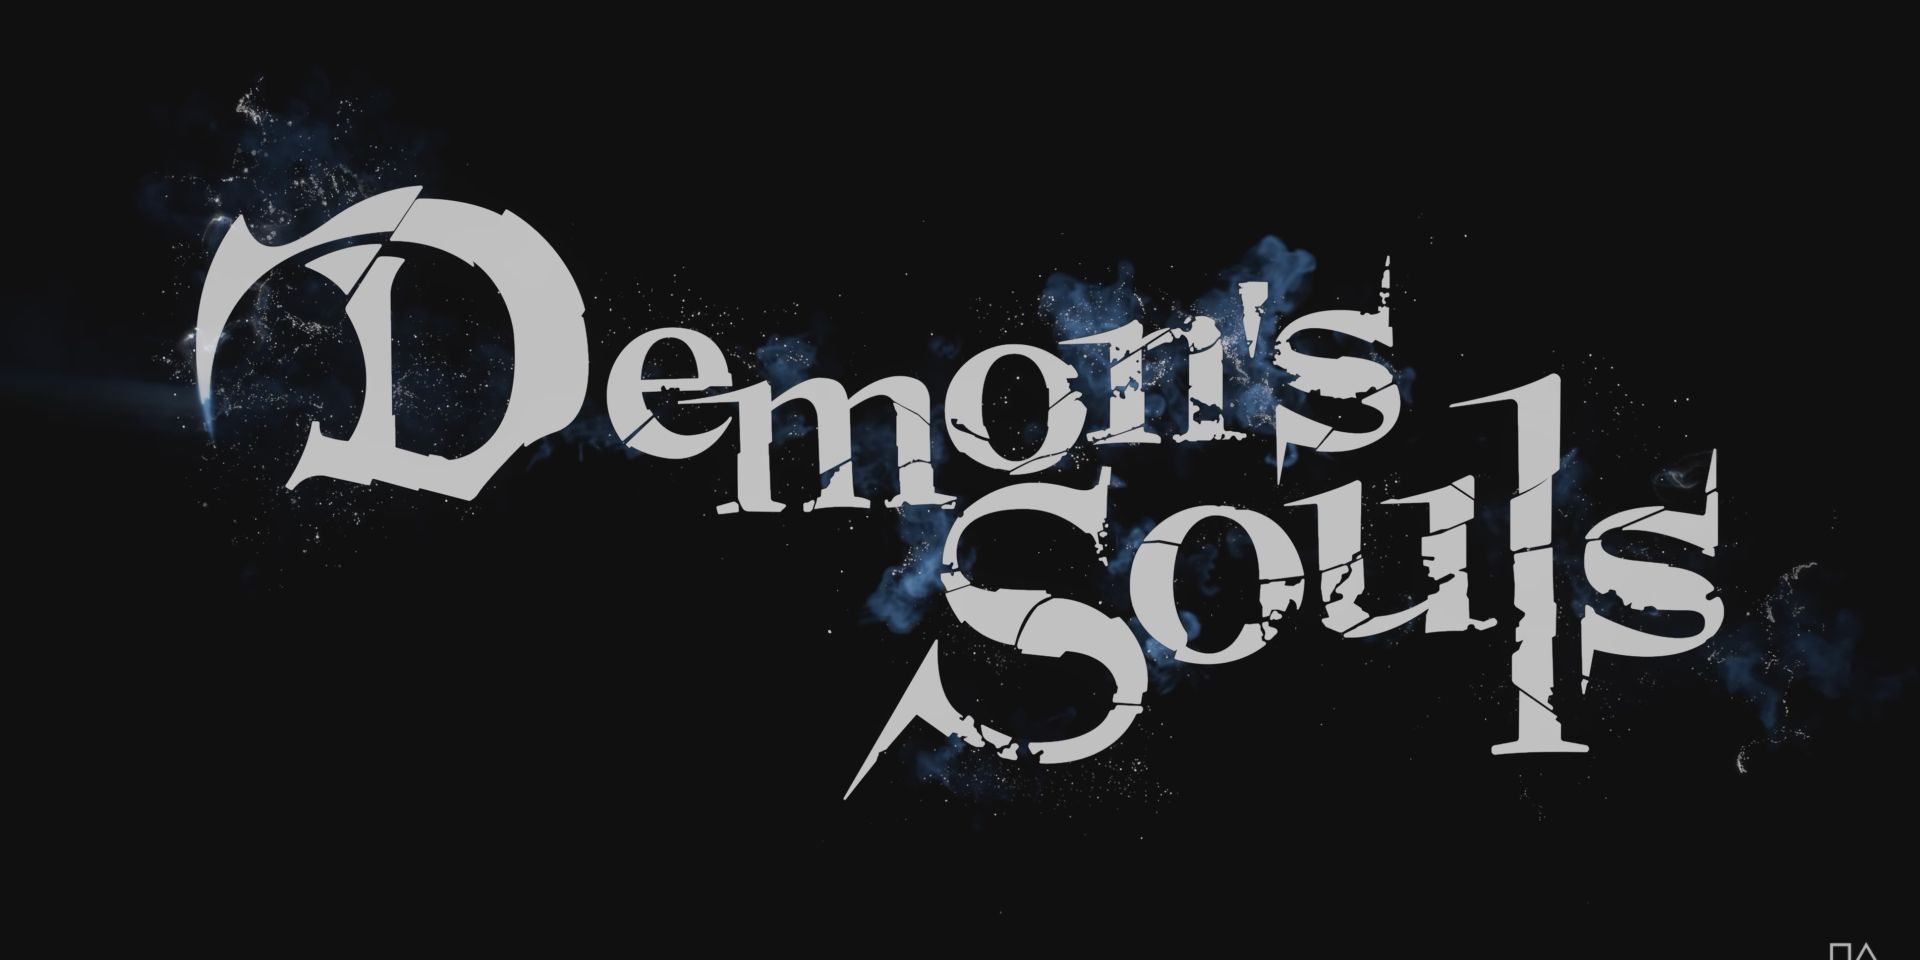 The Demon's Souls title card